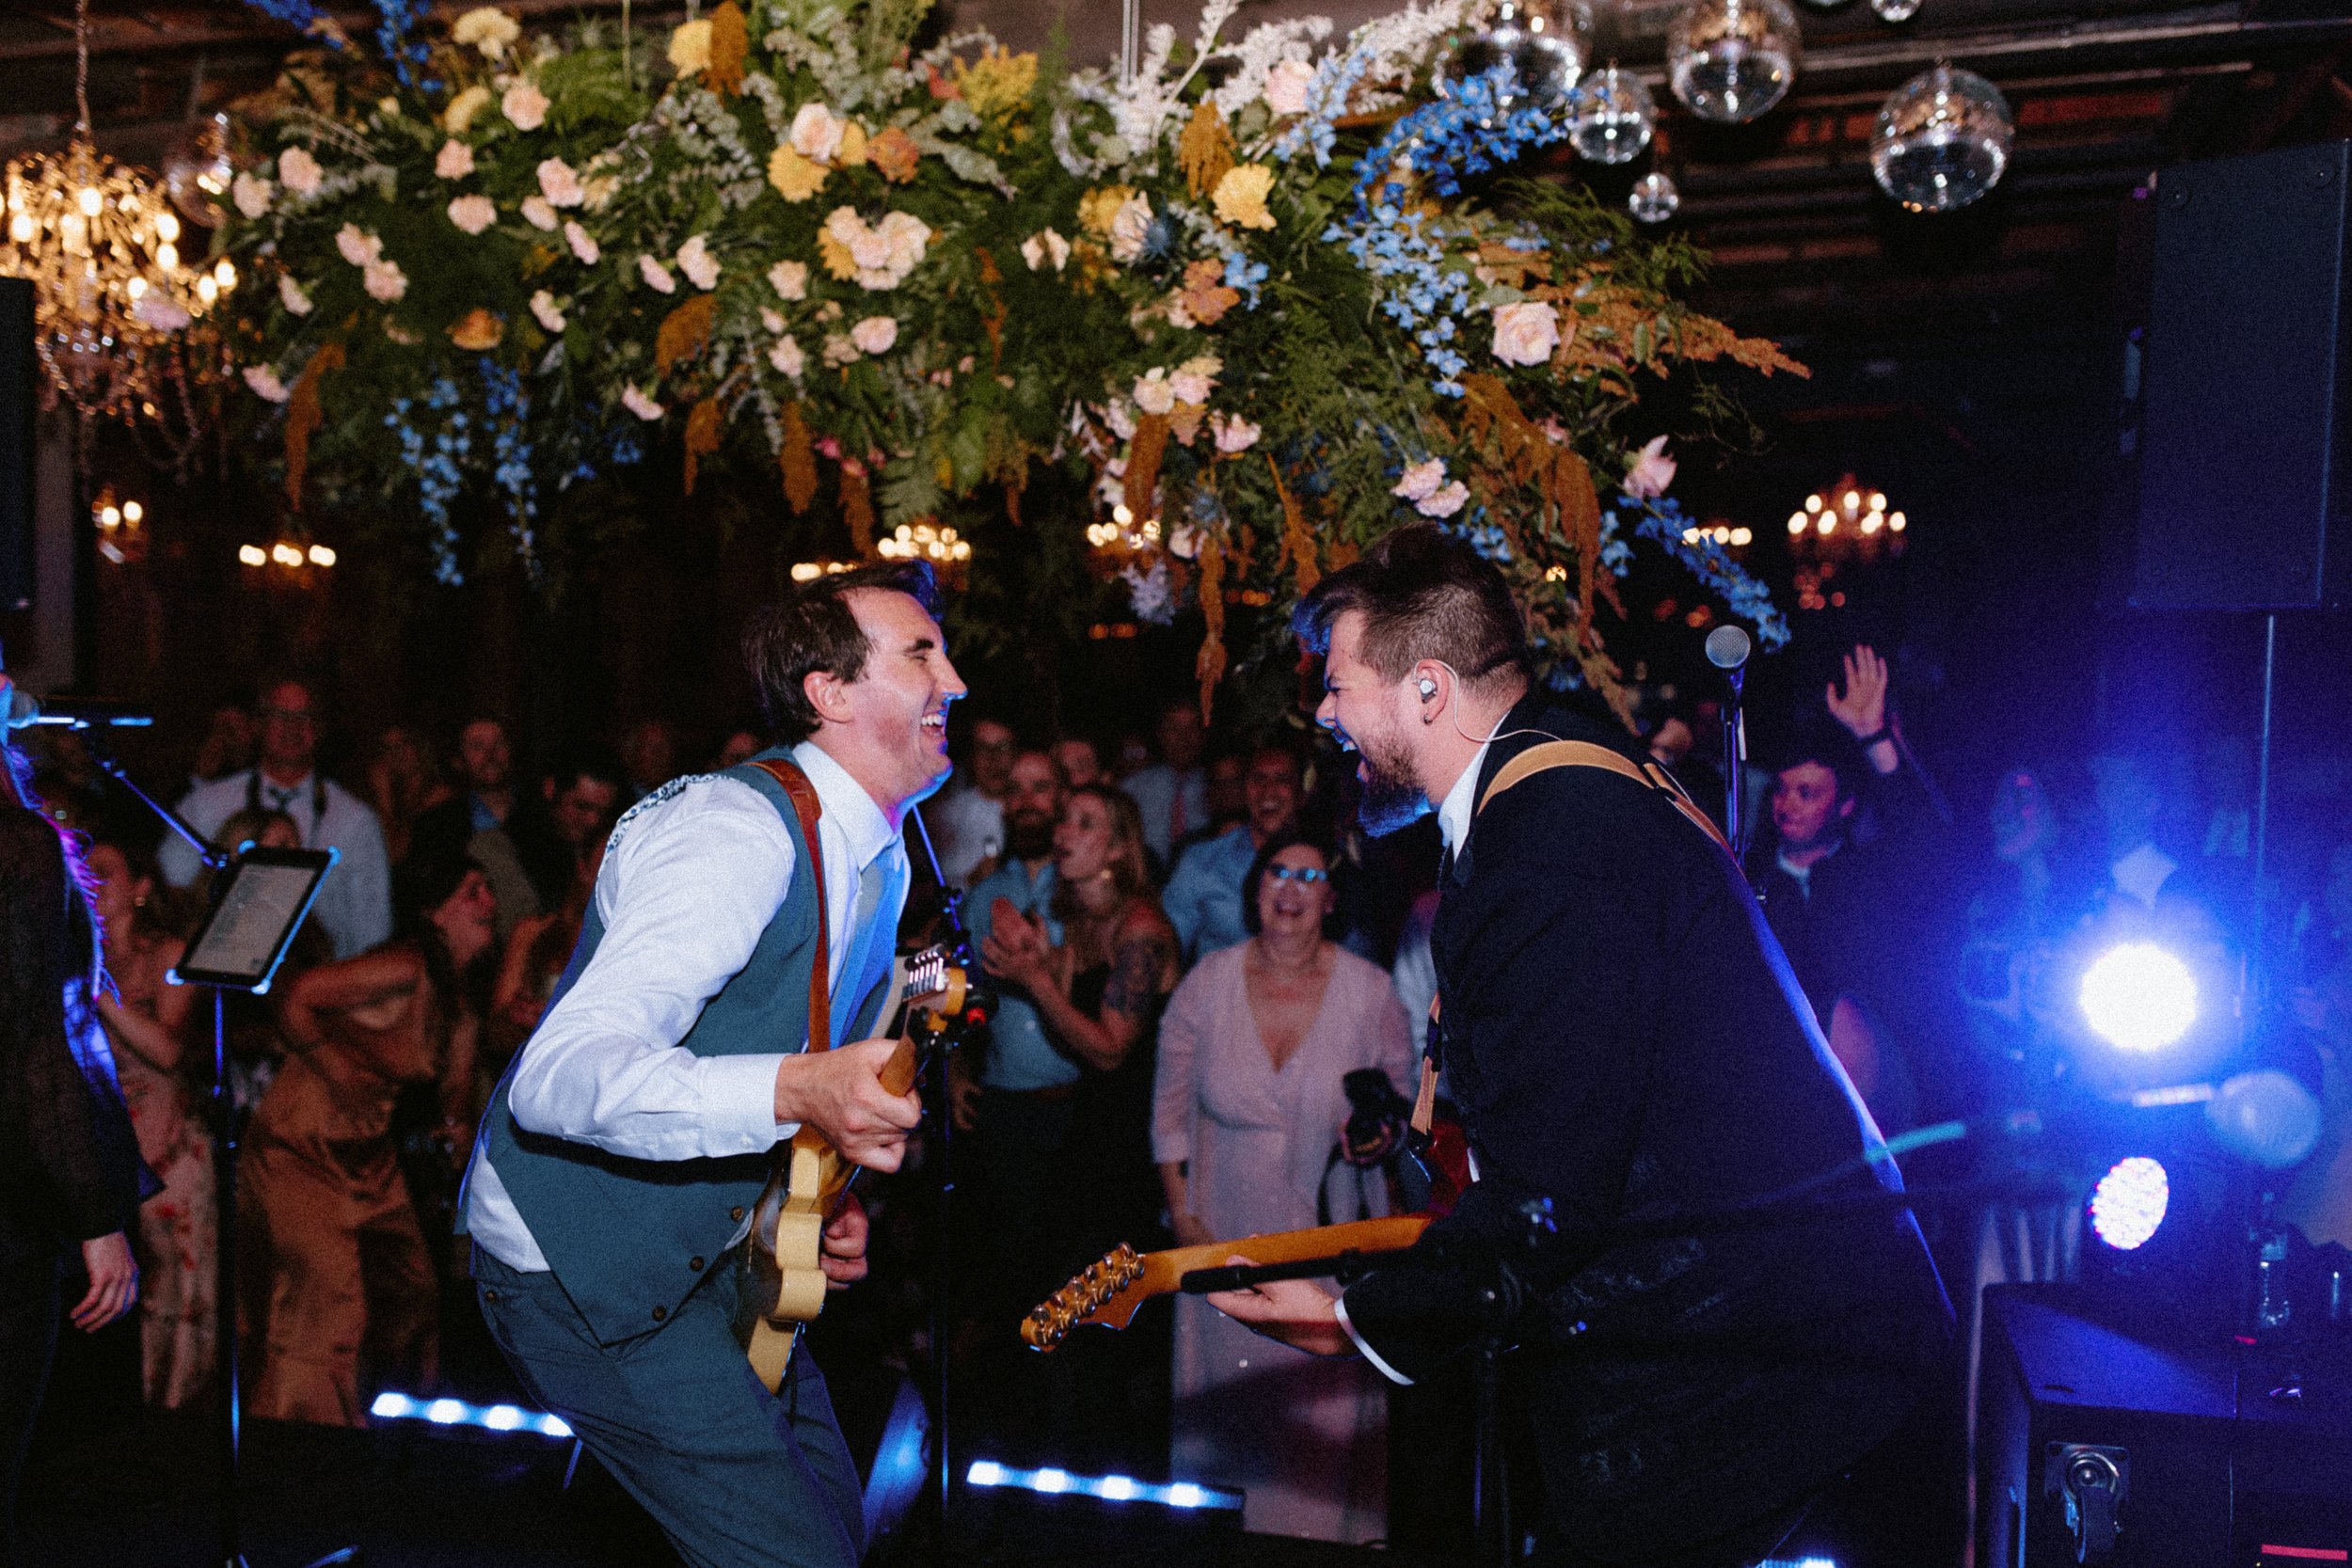 groom playing guitar at his wedding, a lovely wedding reception idea